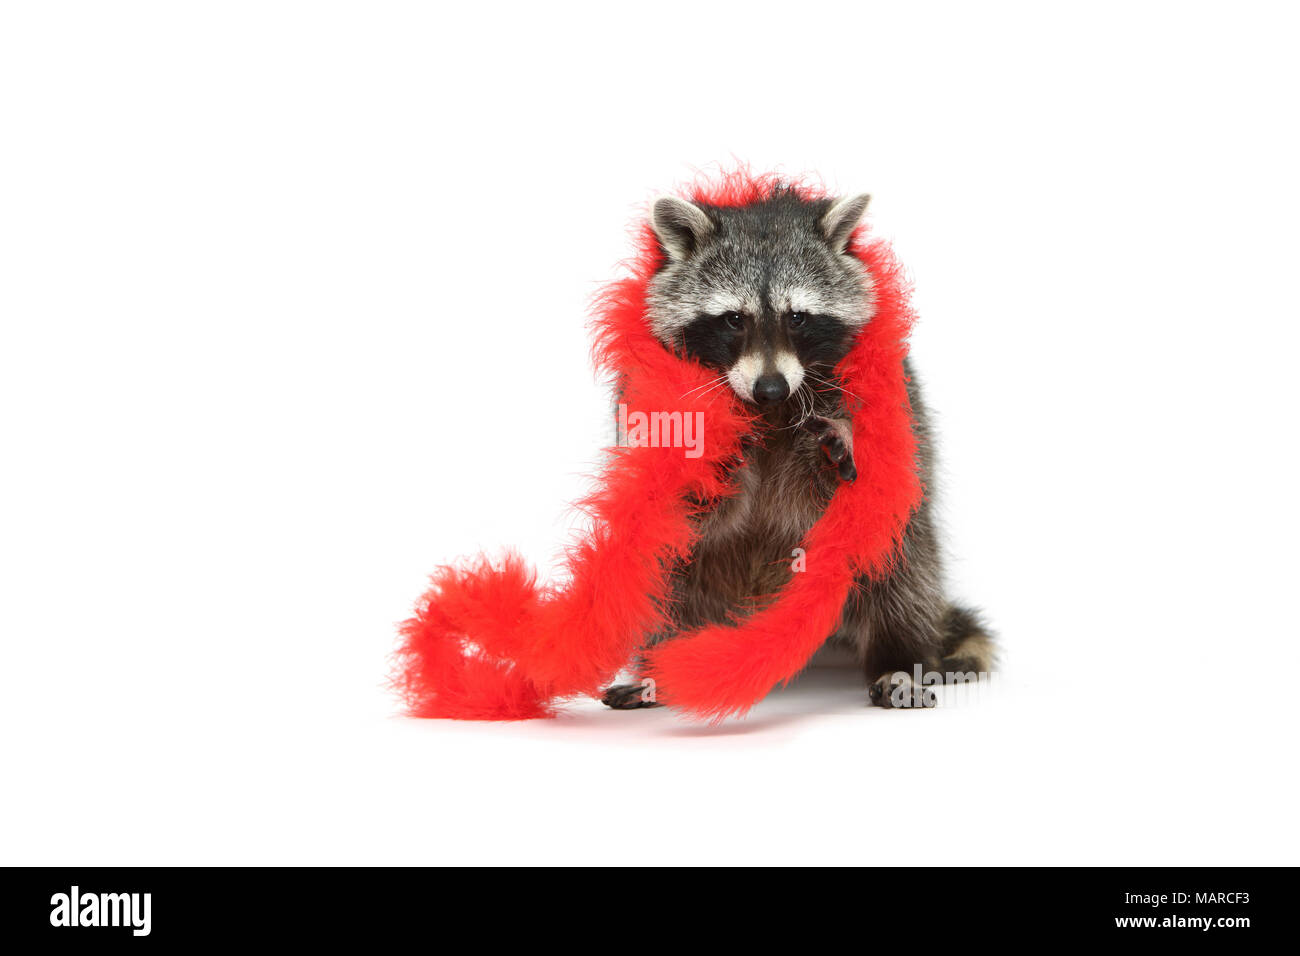 Raccoon (Procyon lotor). Adult sitting, wearing a red feather boa. Studio picture against a white background. Germany Stock Photo